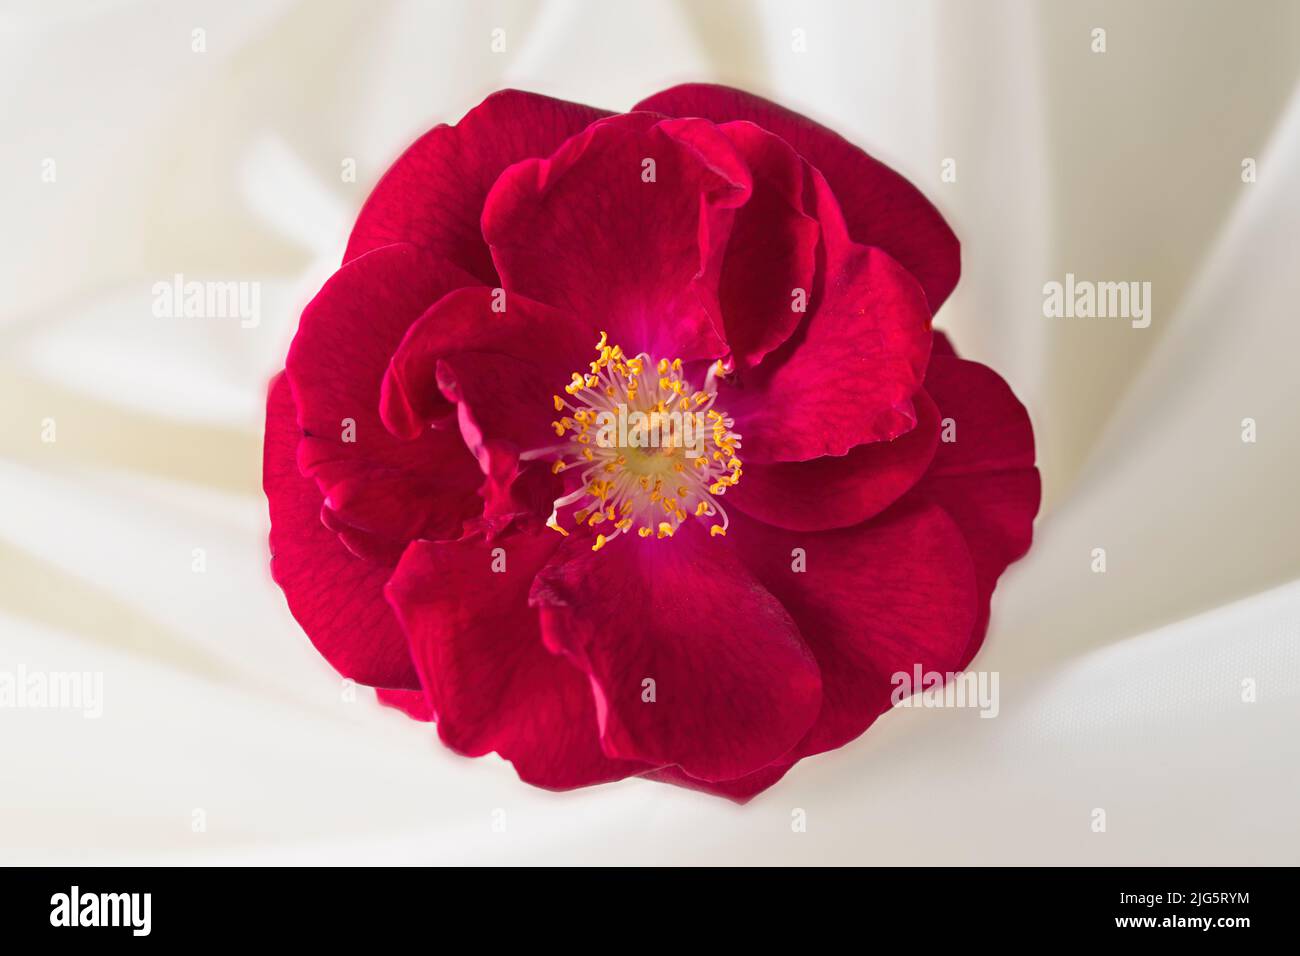 A conceptual photo of a single red rose on a twirled white cloth. Stock Photo